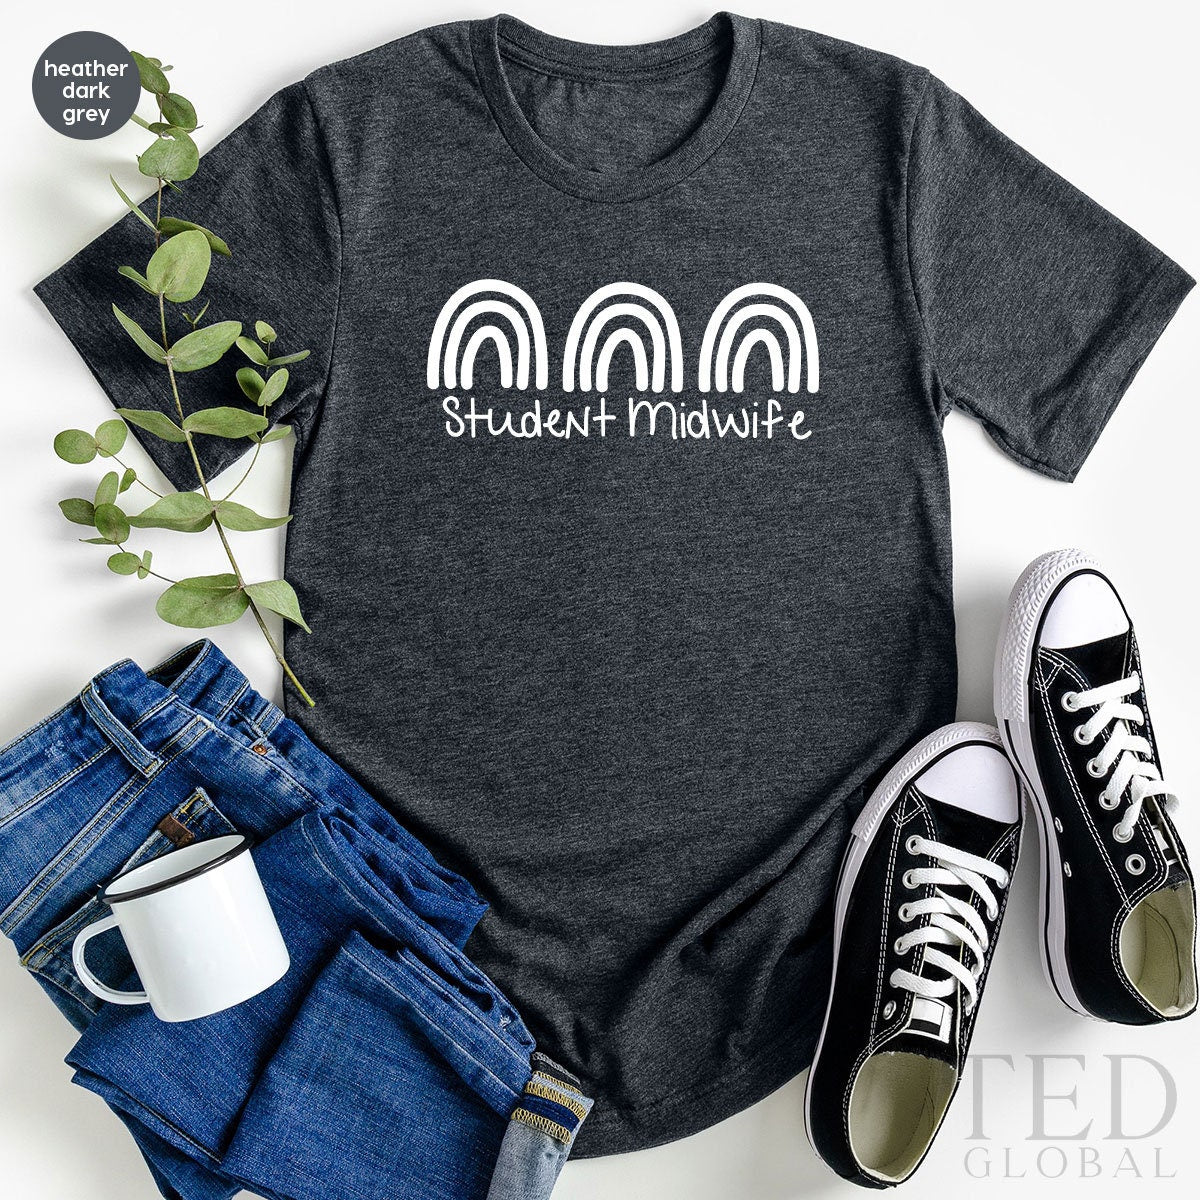 Student Midwife Shirt, Doula TShirt, Gift For Midwife, Birth Worker T Shirt, Future Midwife Shirt, Midwife Graduation, Rainbow Midwife Tee - Fastdeliverytees.com